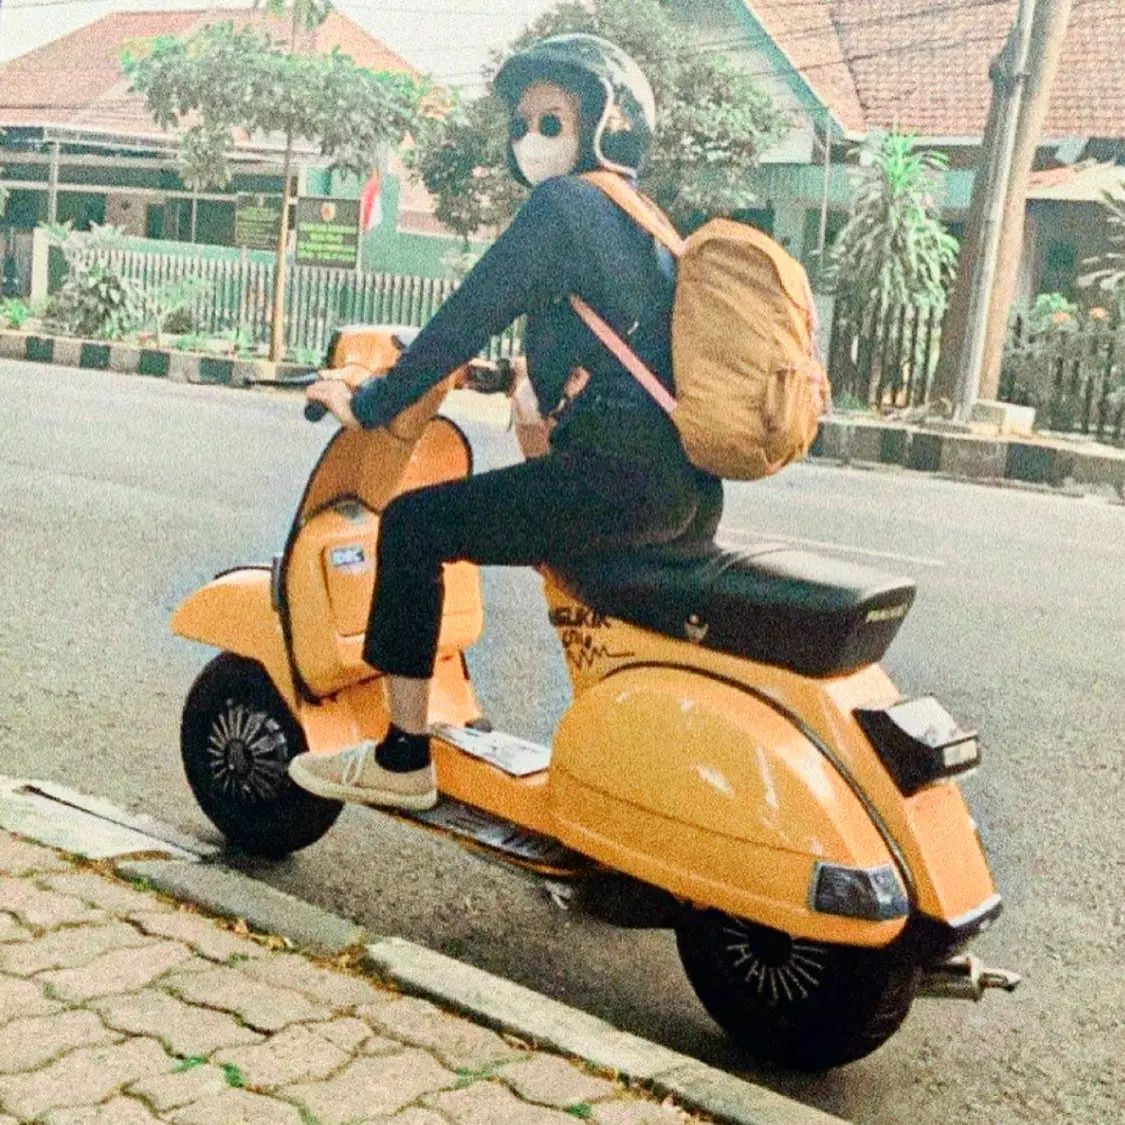 Vespa girl on yellow Vespa px classic 

Hashtag and mention @vespapxnet for feature repost
Check website www.vespapx.net for more 

@auraaauuu